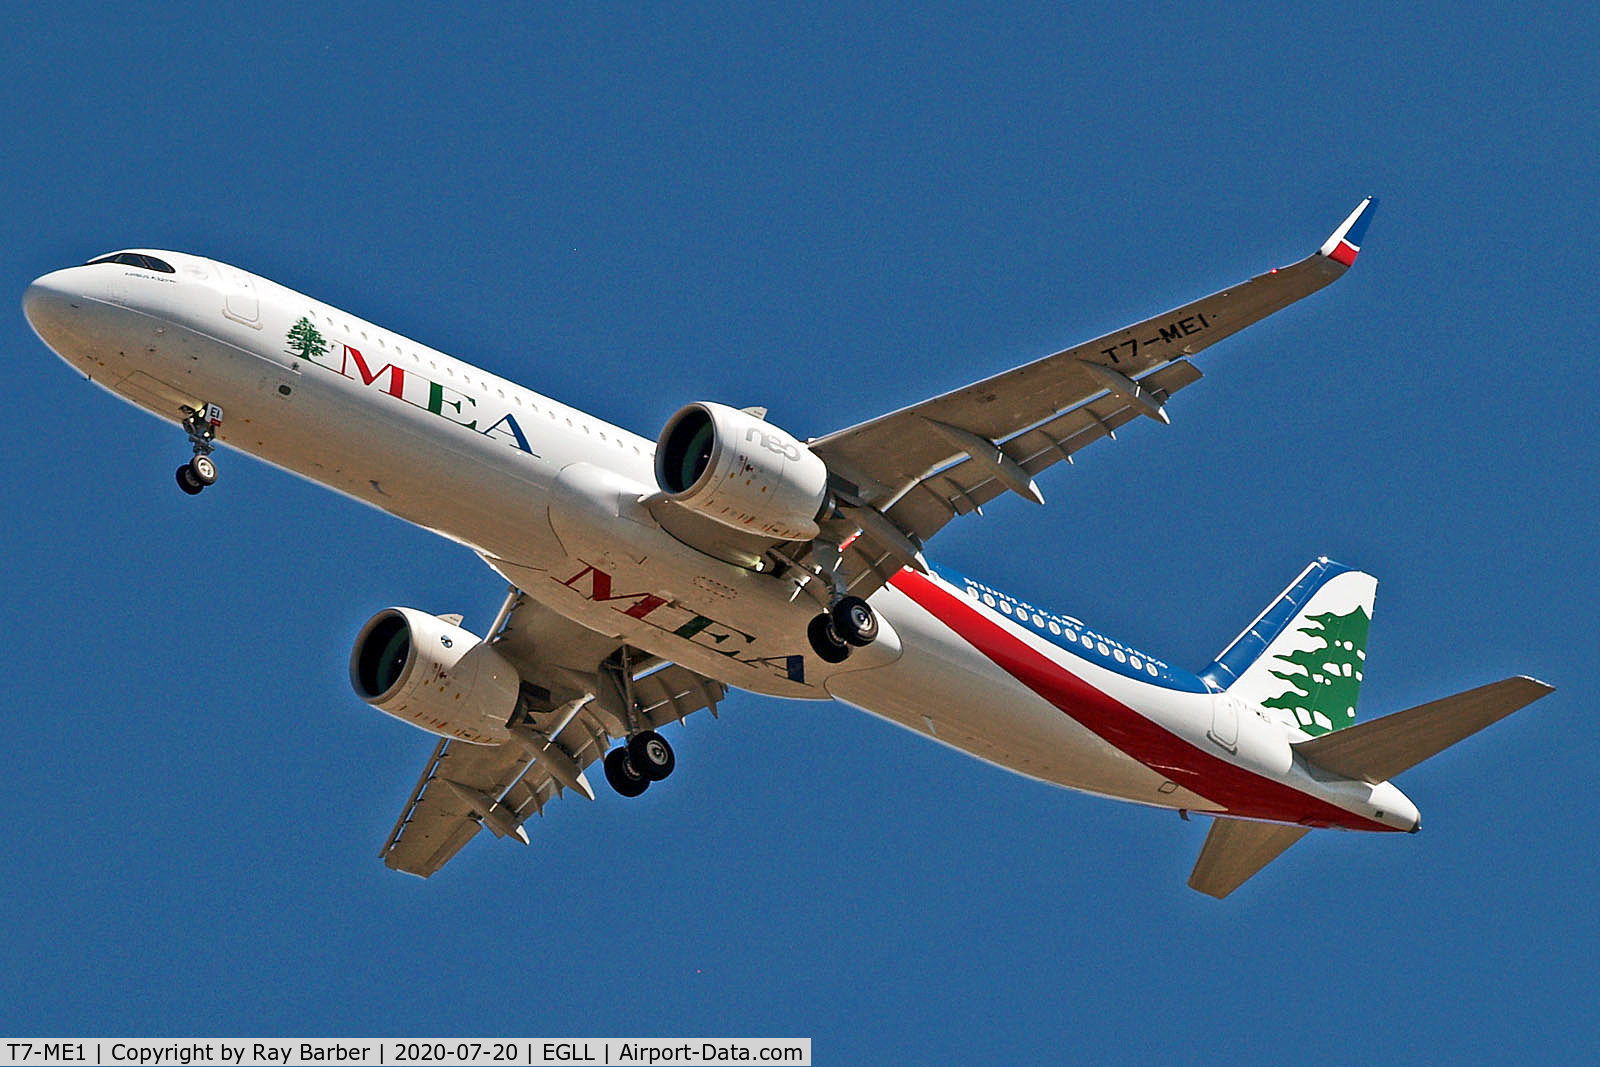 T7-ME1, 2020 Airbus A321-271NX C/N 9427, T7-ME1   Airbus A321-271NX [9427] (MEA-Middle East Airlines) Home~G 30/07/2020